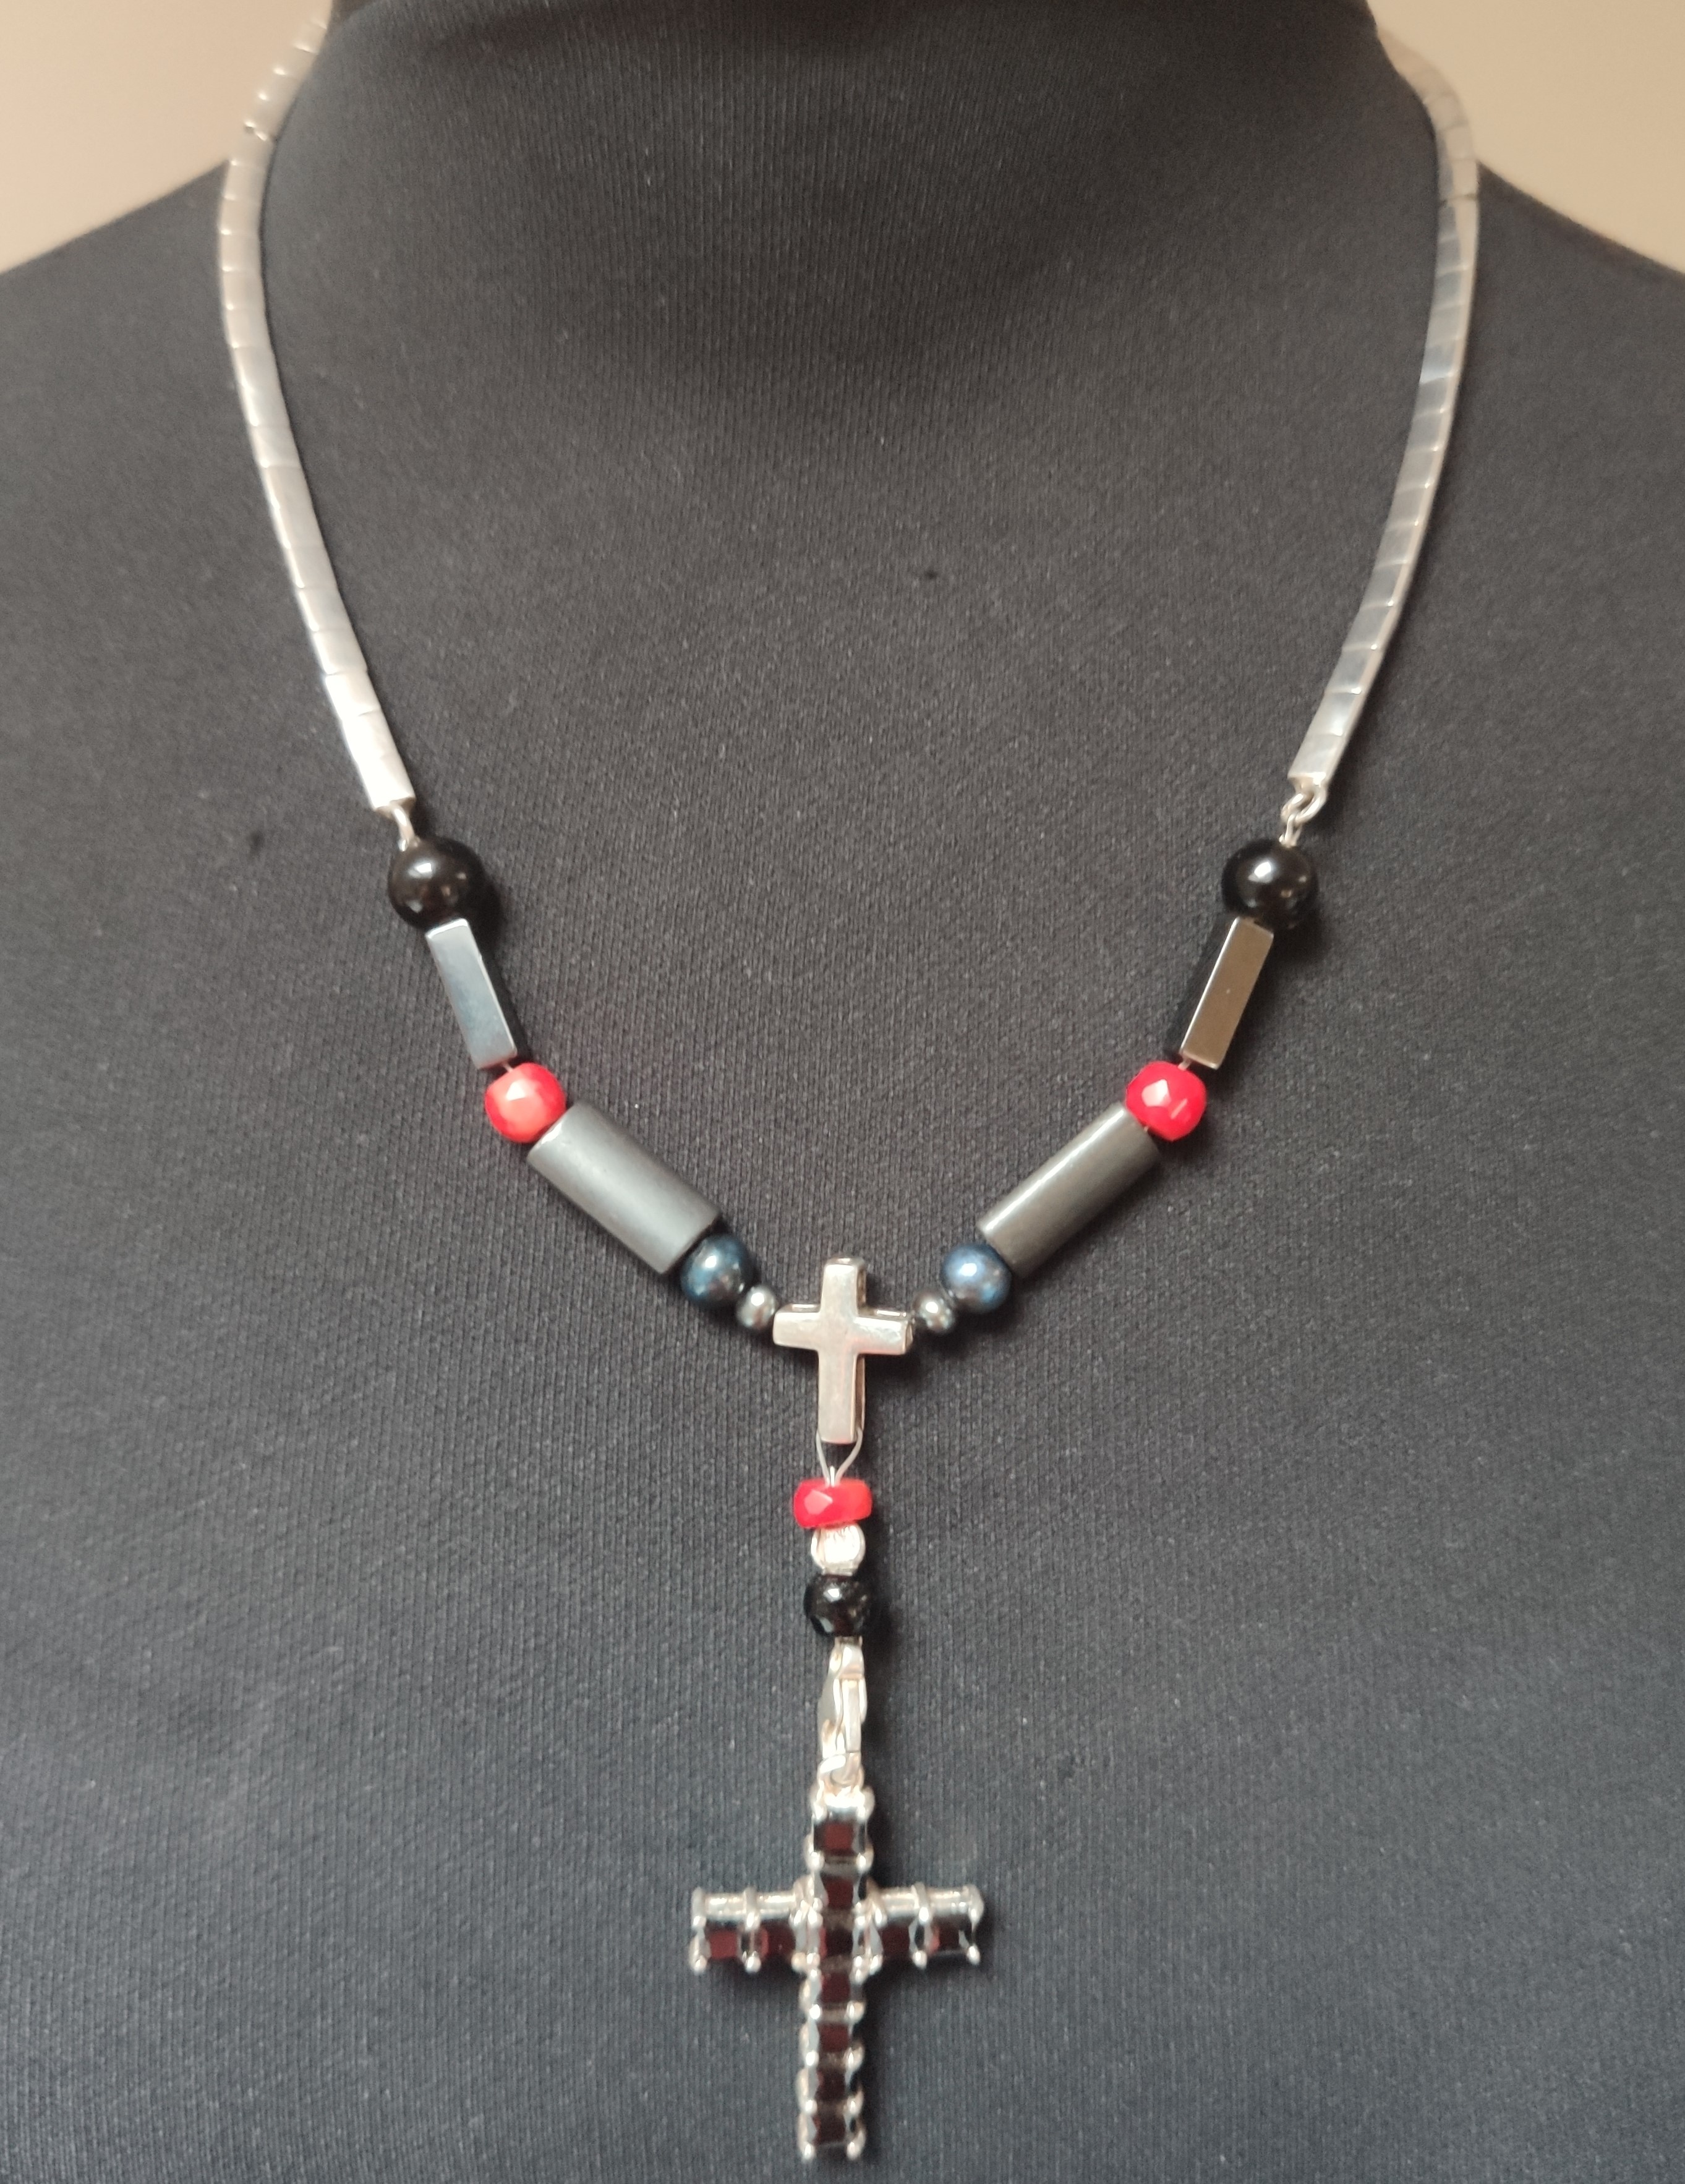 A Stunning 925 Sterling Silver Necklace With A Cross That Could Be Silver or 9Ct White Gold. 51.5... - Image 2 of 3